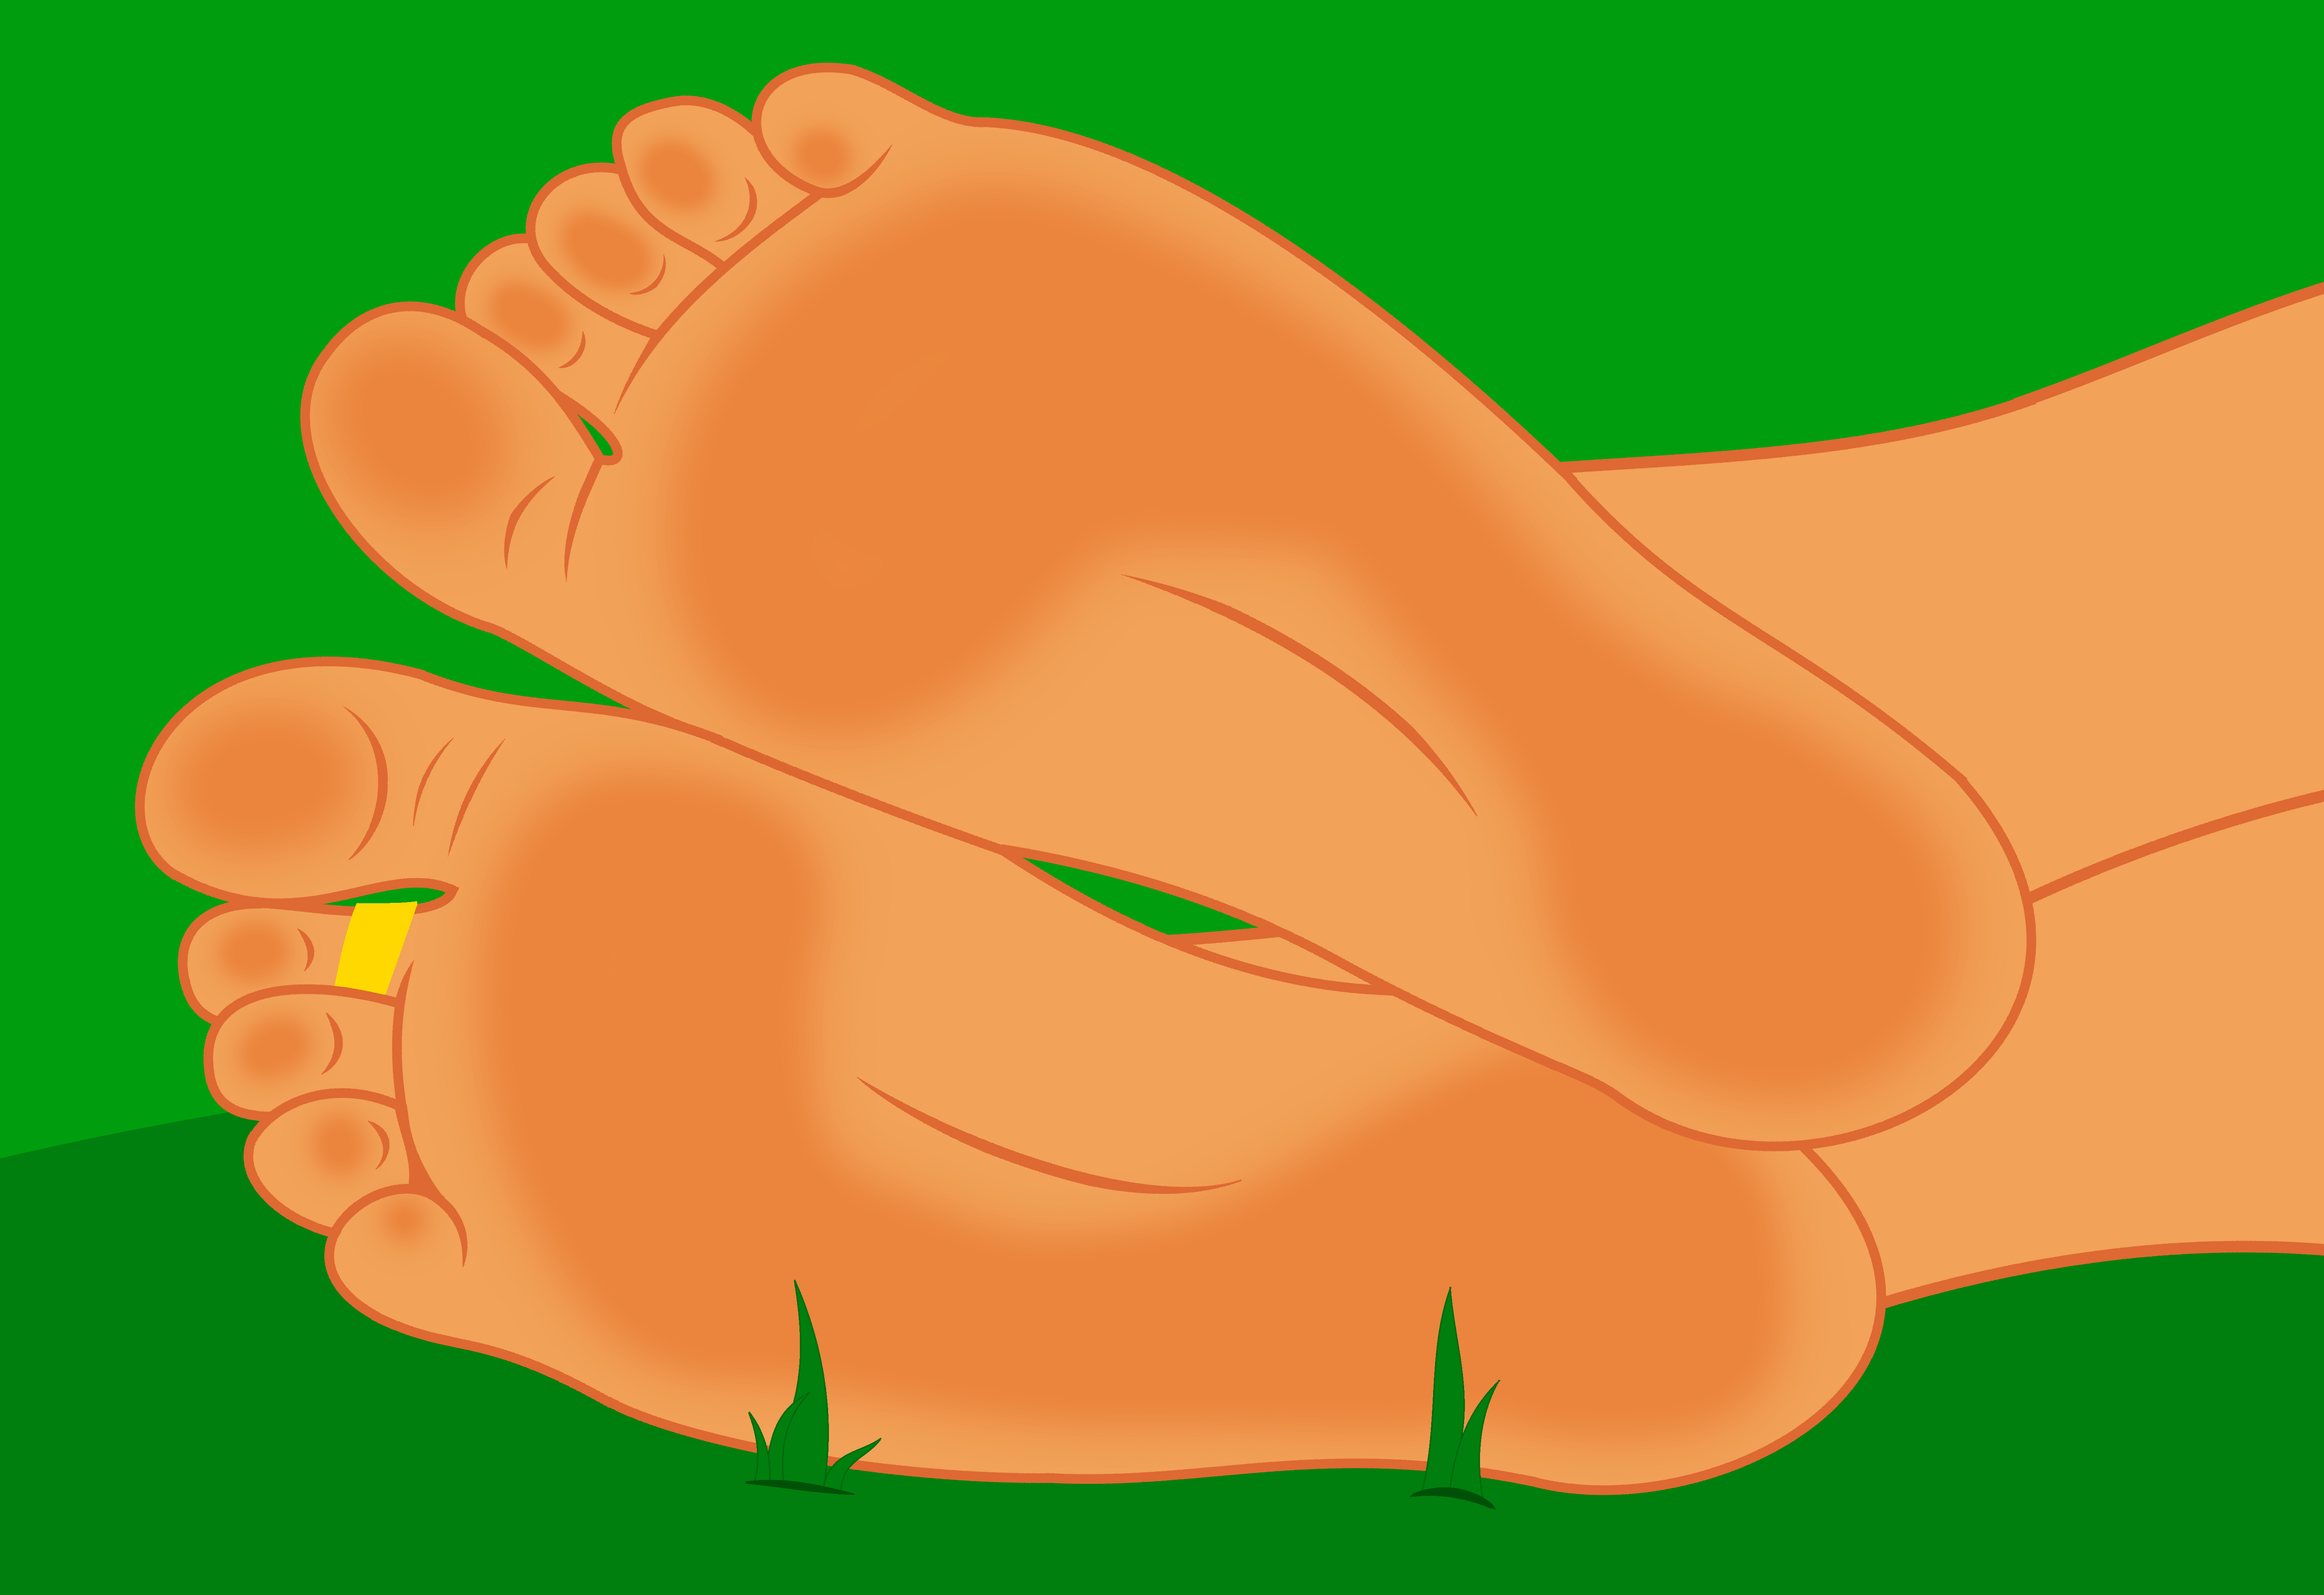 Mlp Feet Porn - 2107869 - safe, artist:lilihoof, saffron masala, human, equestria girls,  barefoot, dirt, dirty, dirty feet, feet, fetish, foot fetish, foot focus,  grass, green background, legs, pictures of legs, simple background, soles,  toe ring -